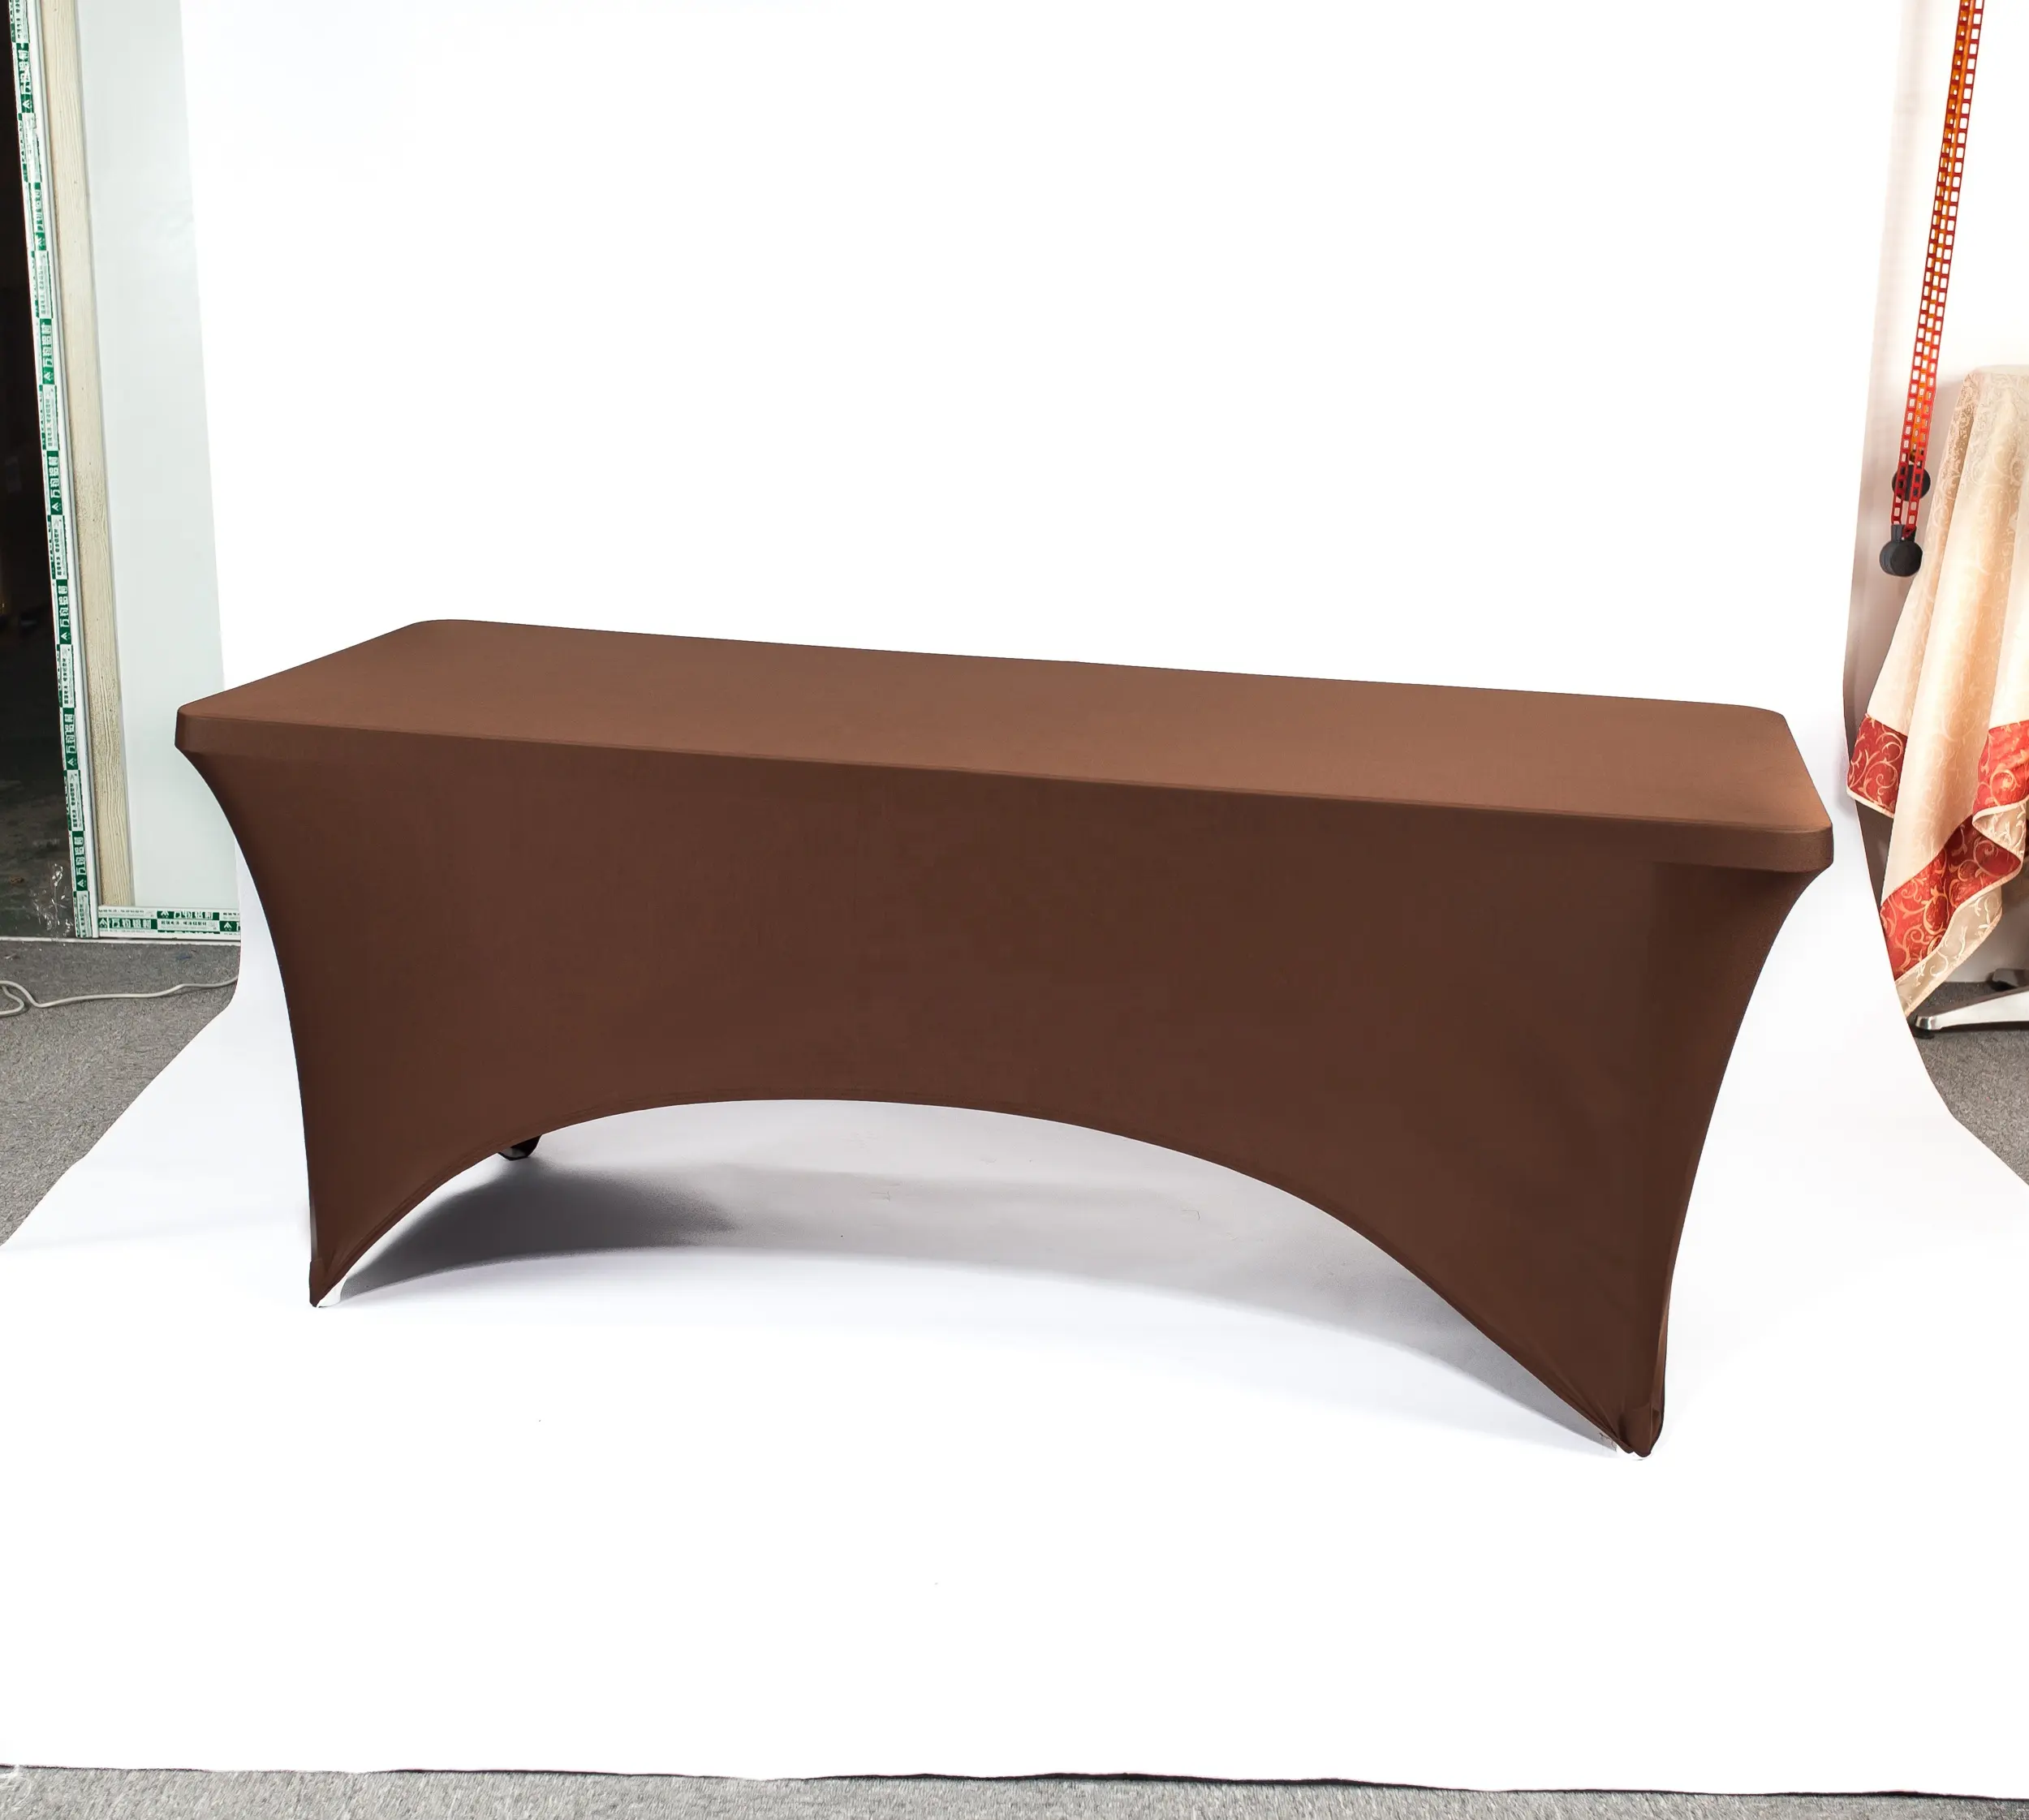 6ft Rectangular Brown Tablecloth Spandex Tablecloths Fitted Stretch Polyester Table Cover For Wedding Banquet Party